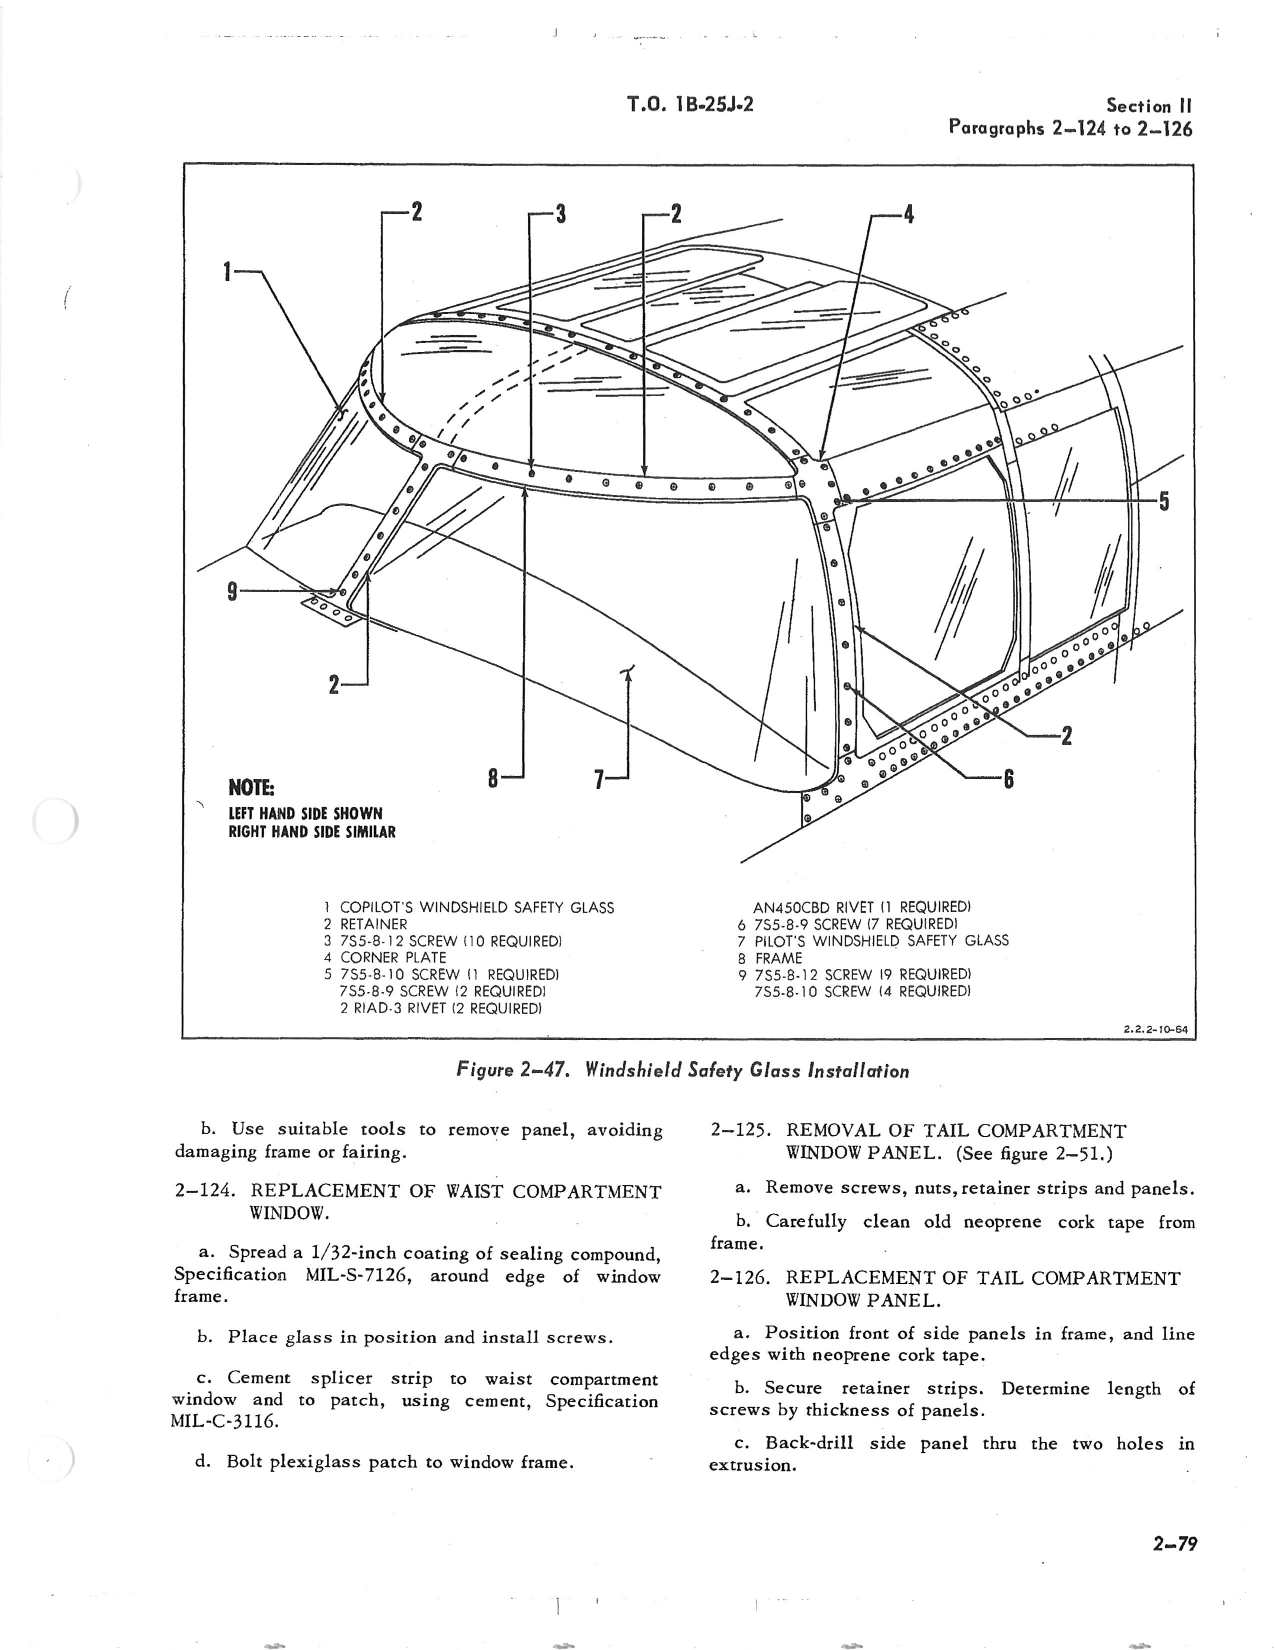 Sample page 111 from AirCorps Library document: B-25 Maintenance Instructions